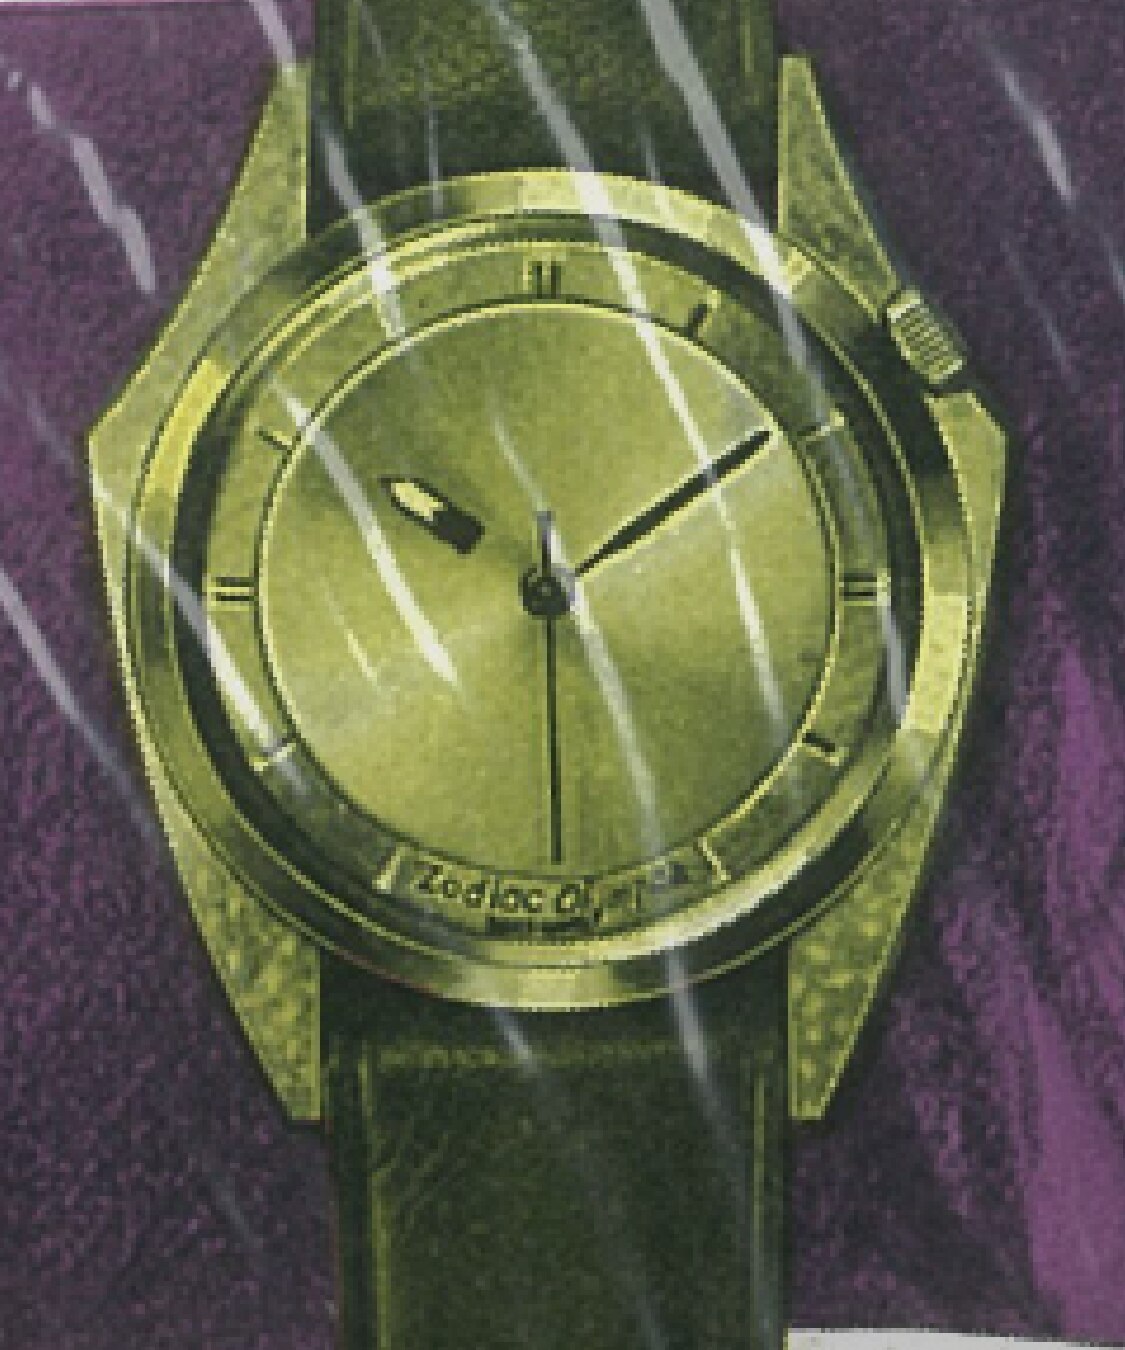 Purple and gold pop art style image, with a close up image of a face and a Zodiac Olympos watch.